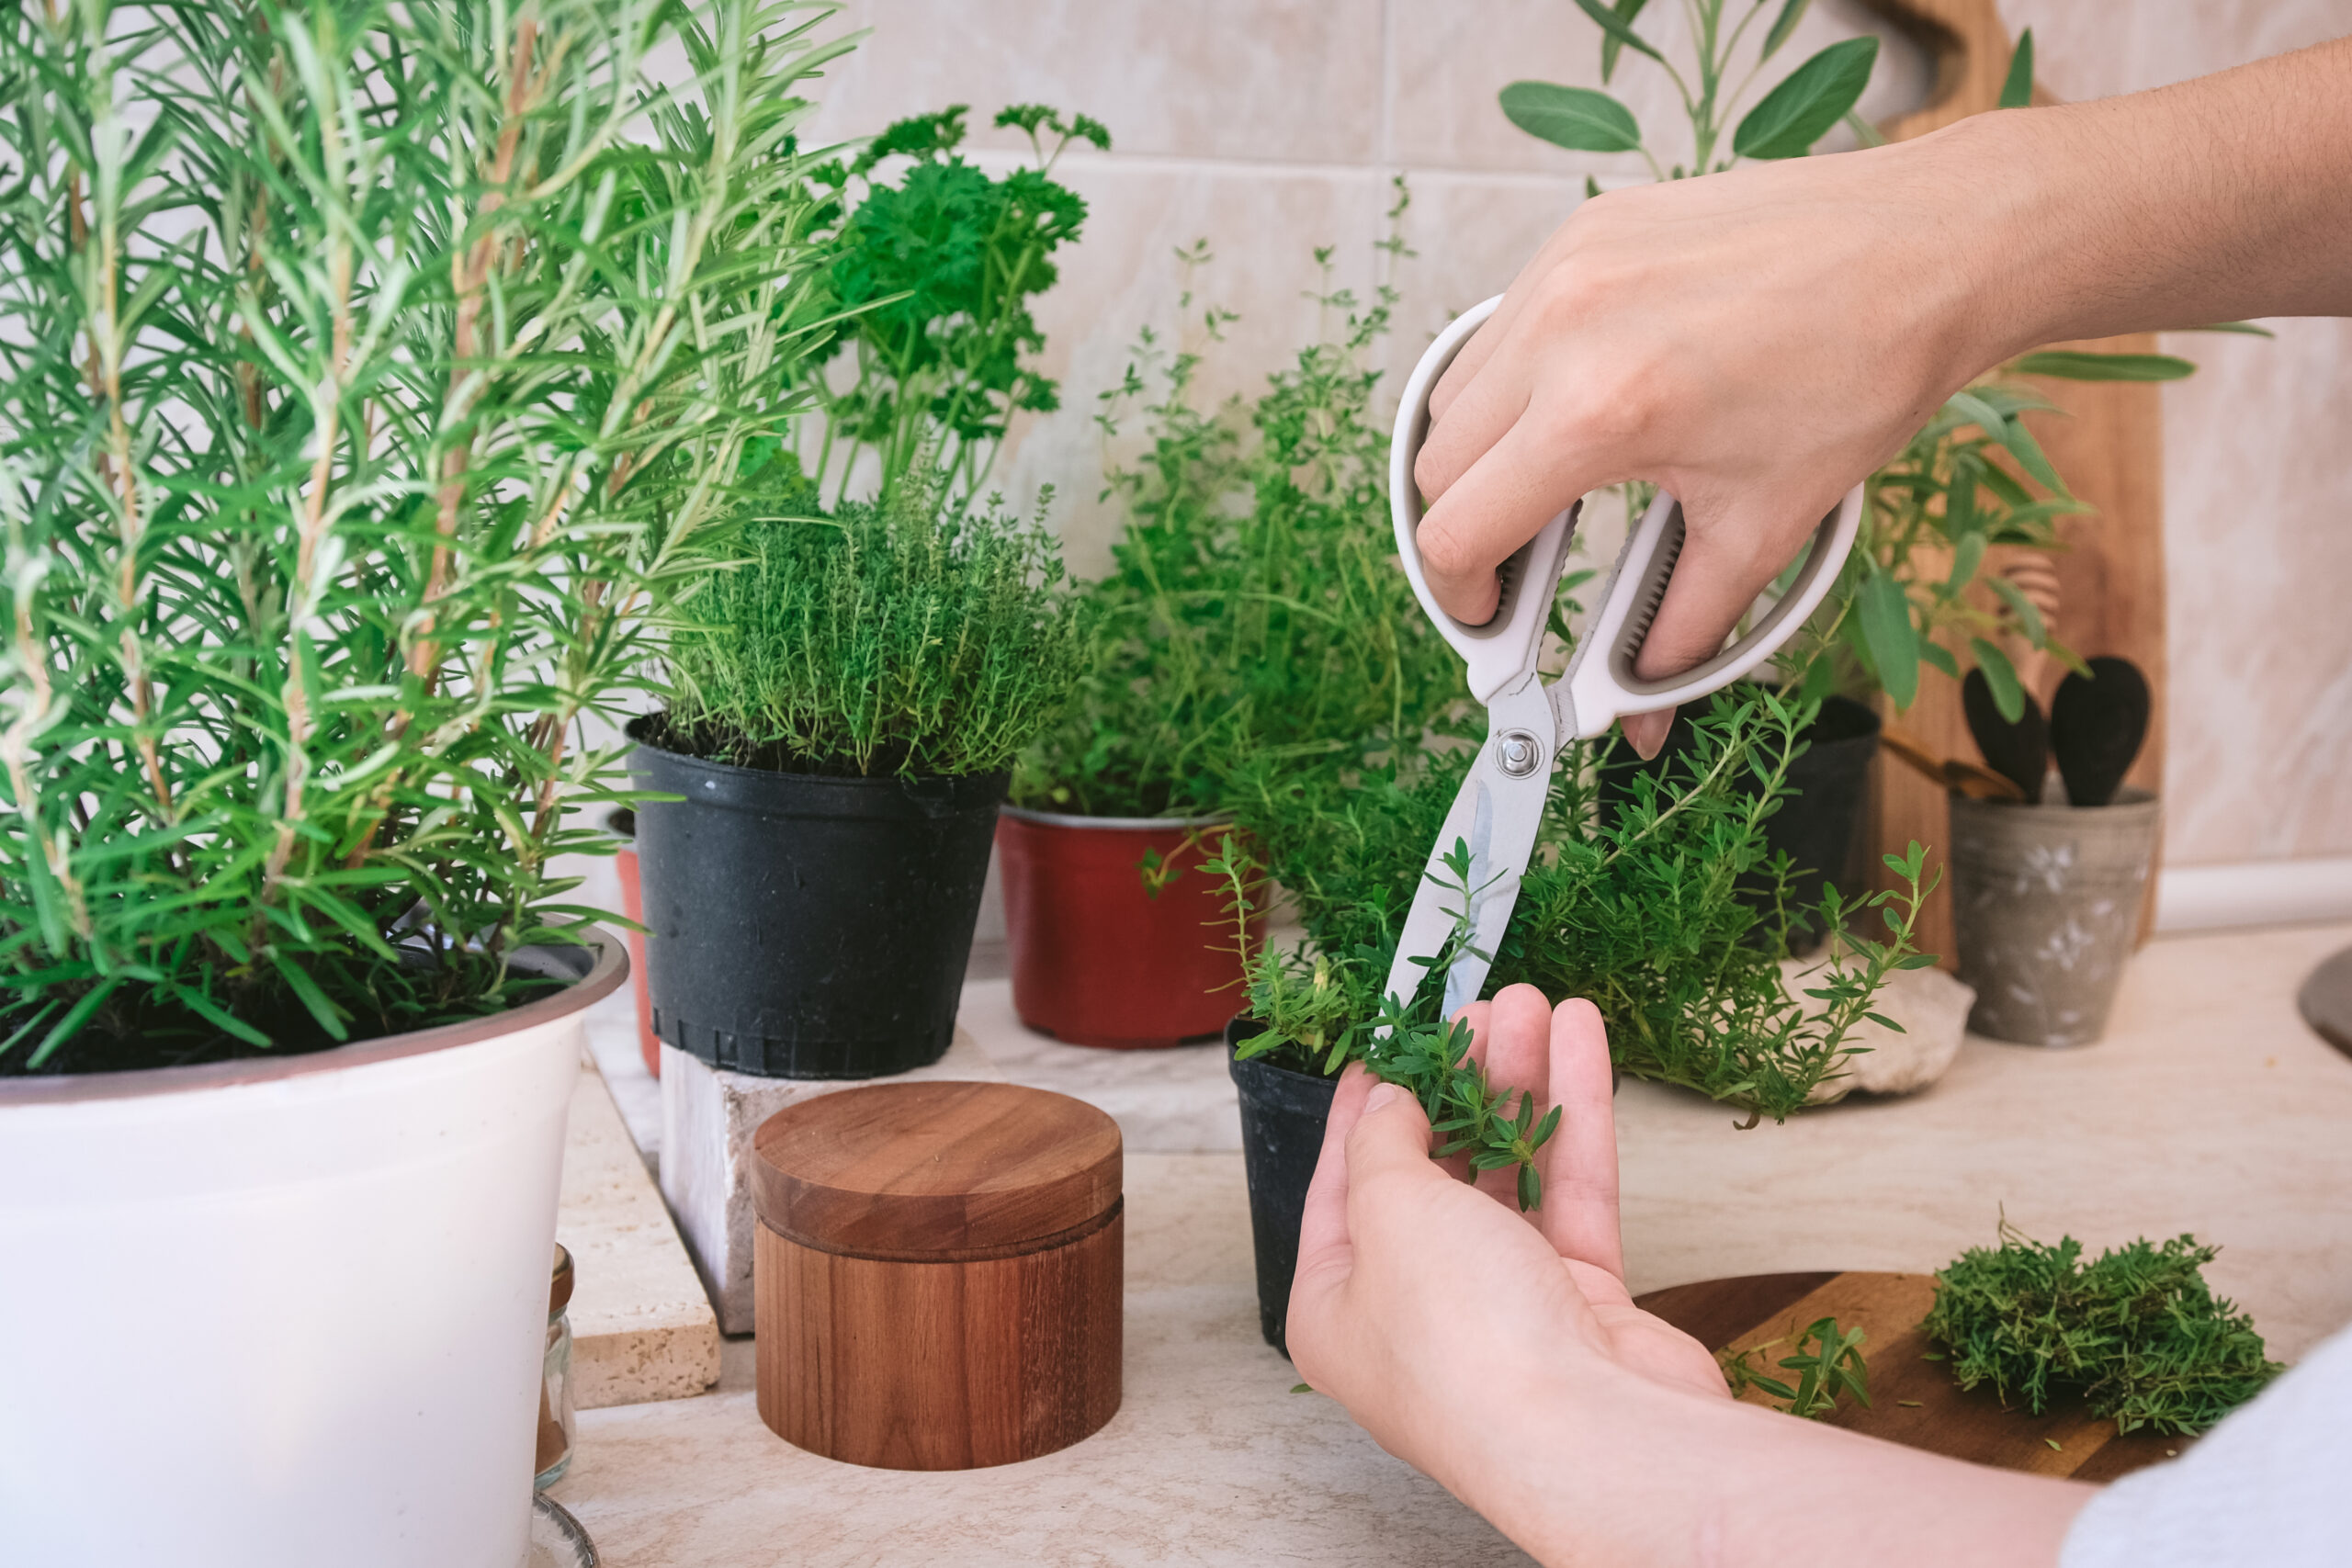 cutting herbs off a plant